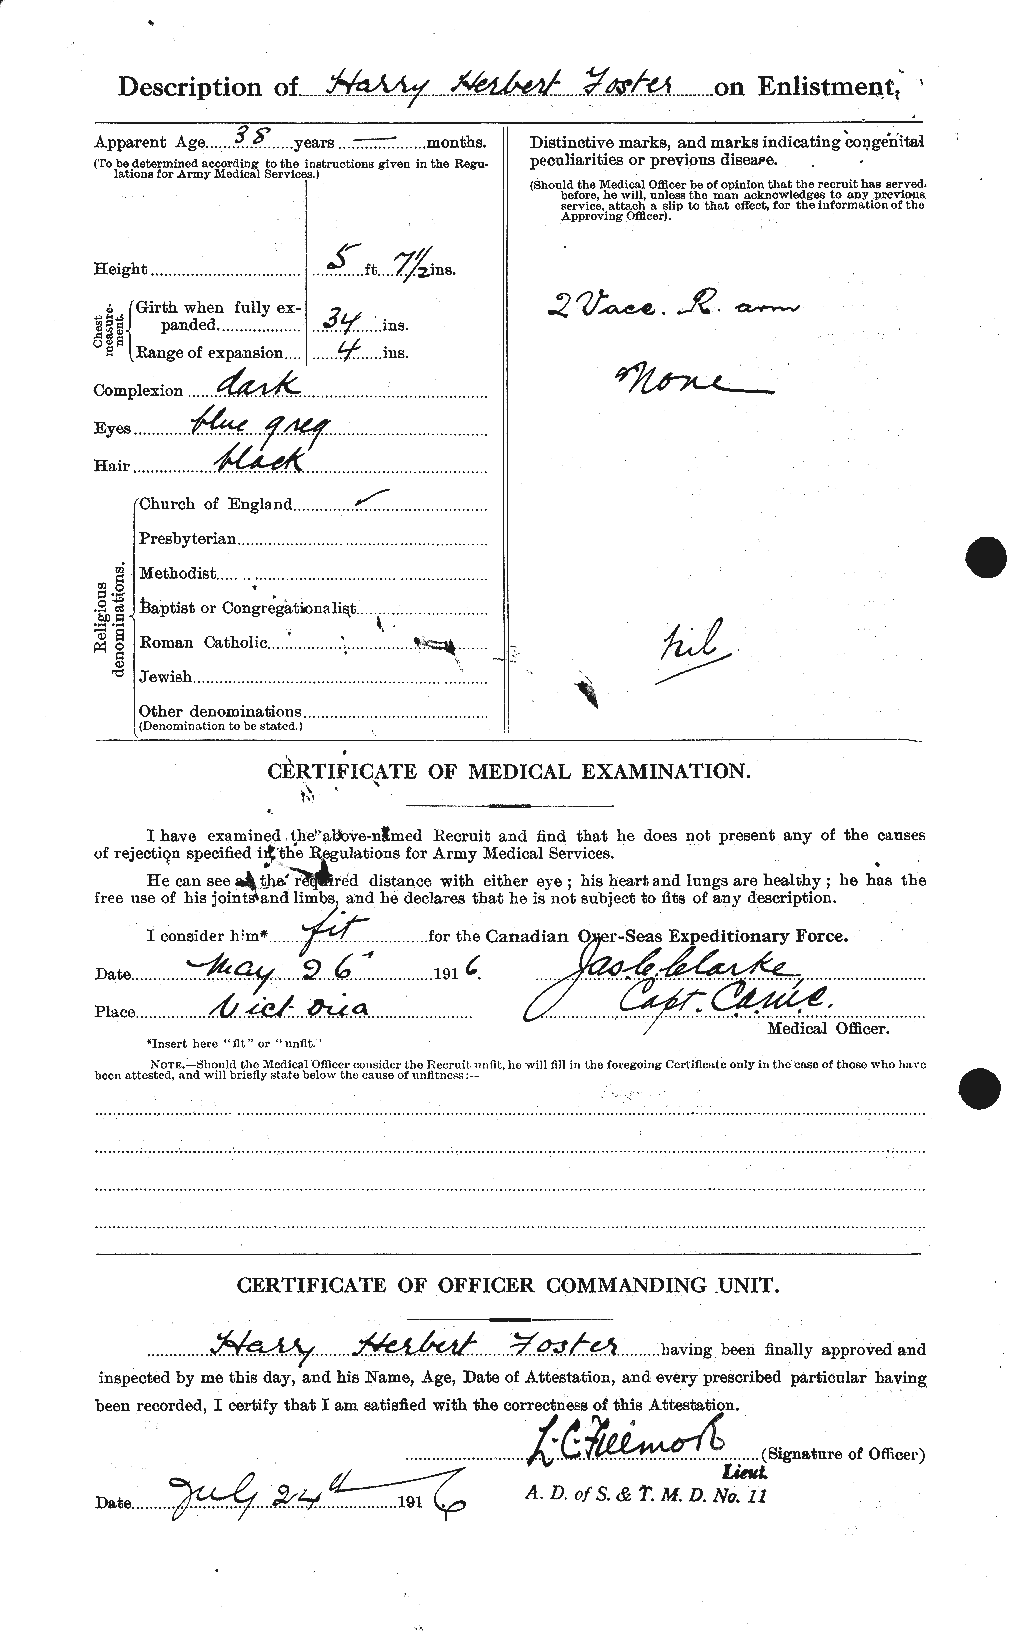 Personnel Records of the First World War - CEF 330751b